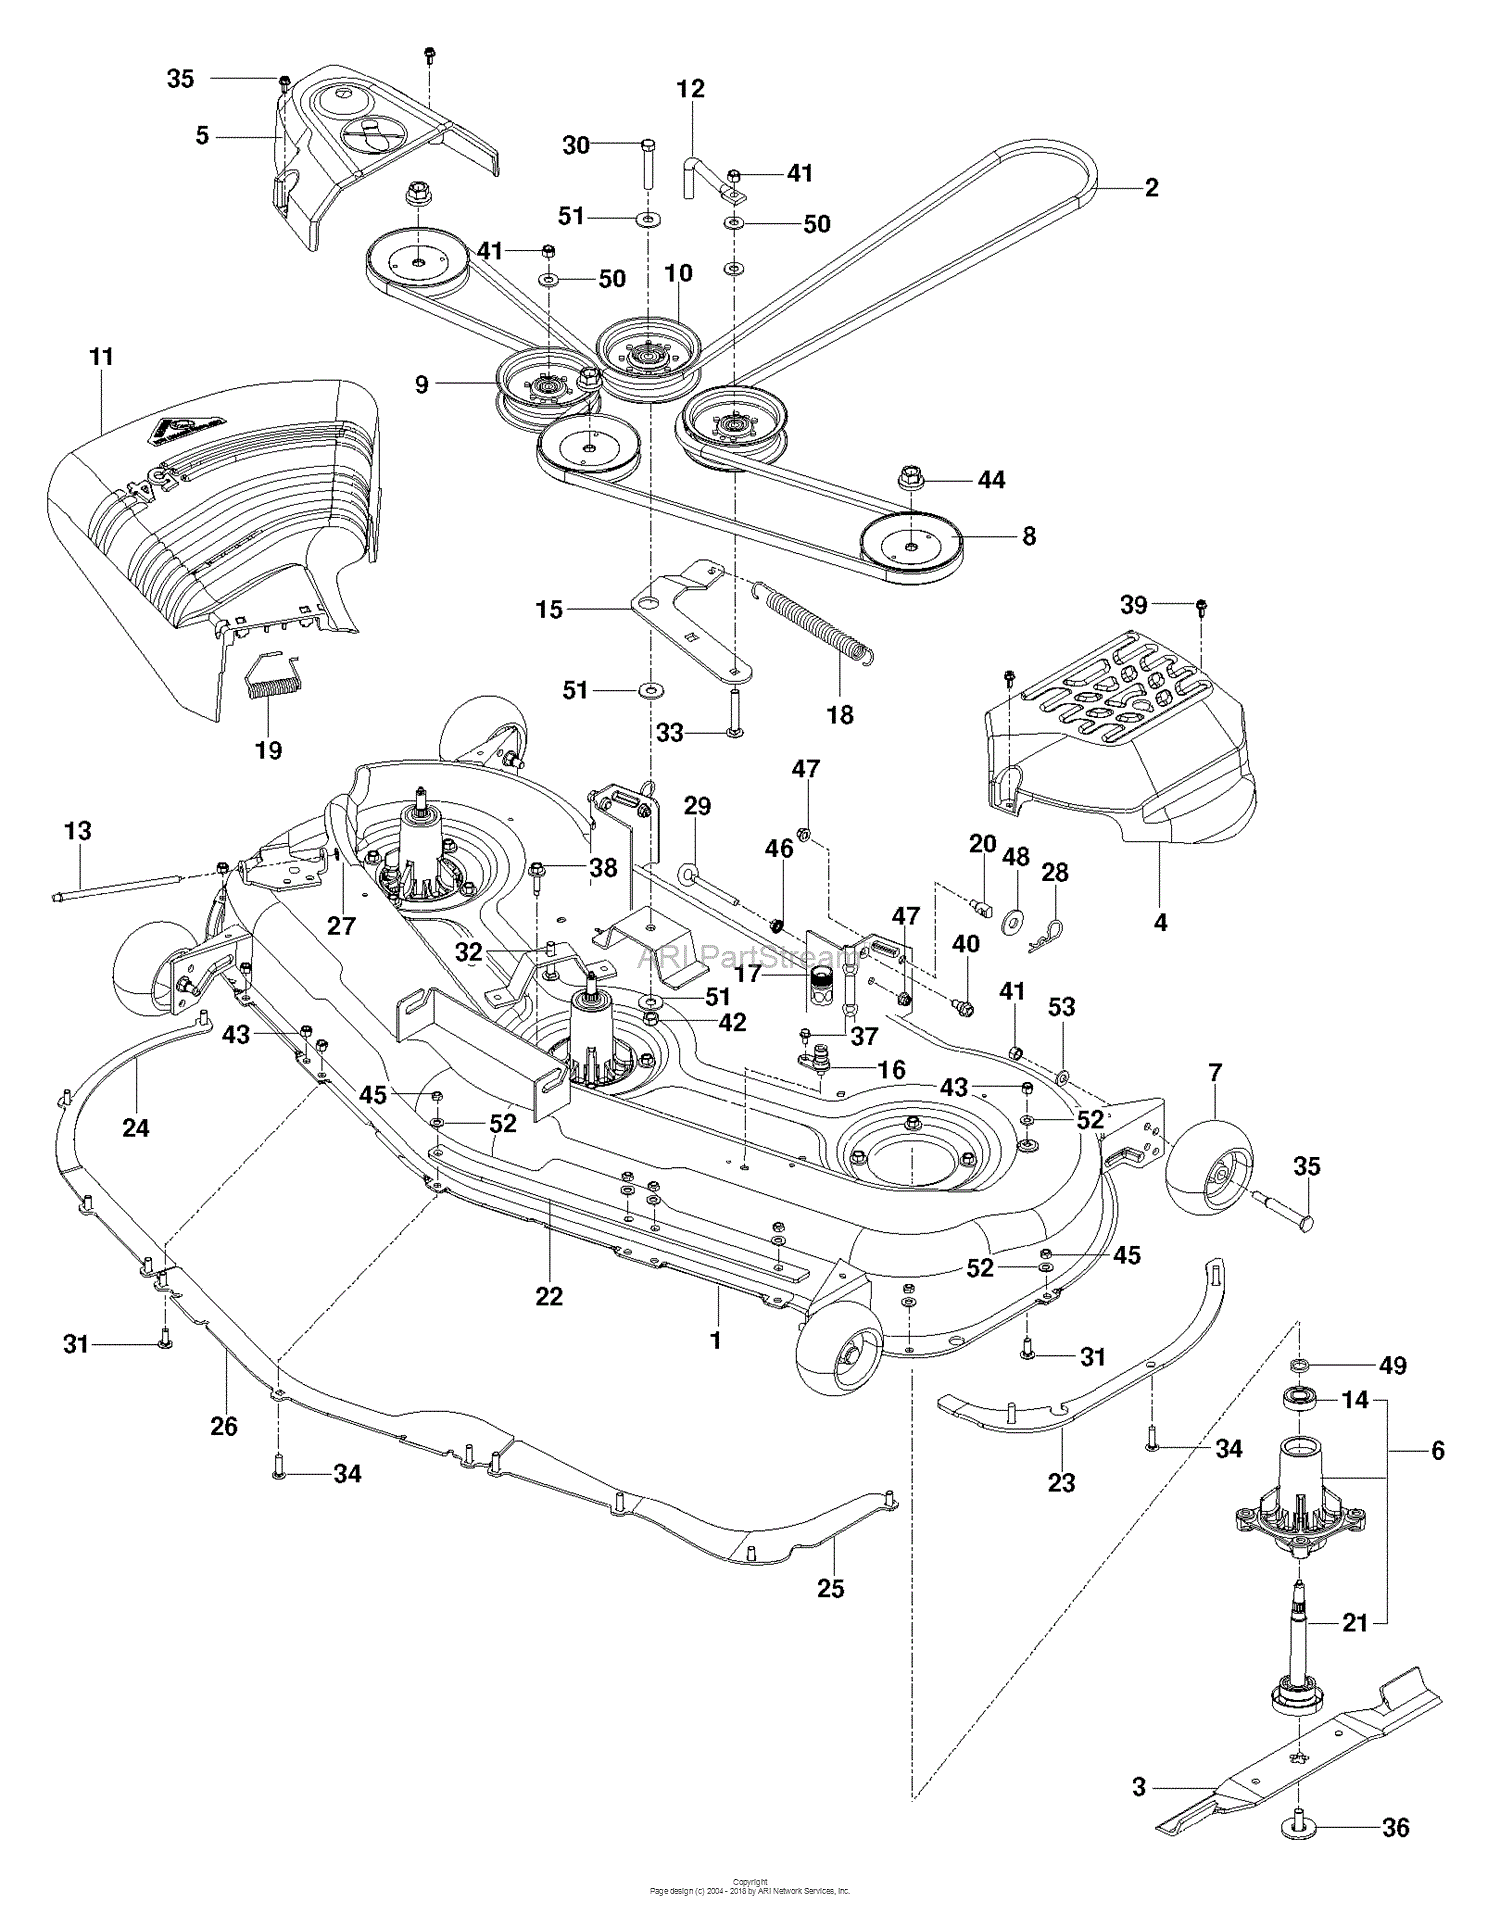 Parts Diagram For Mower Deck Cutting